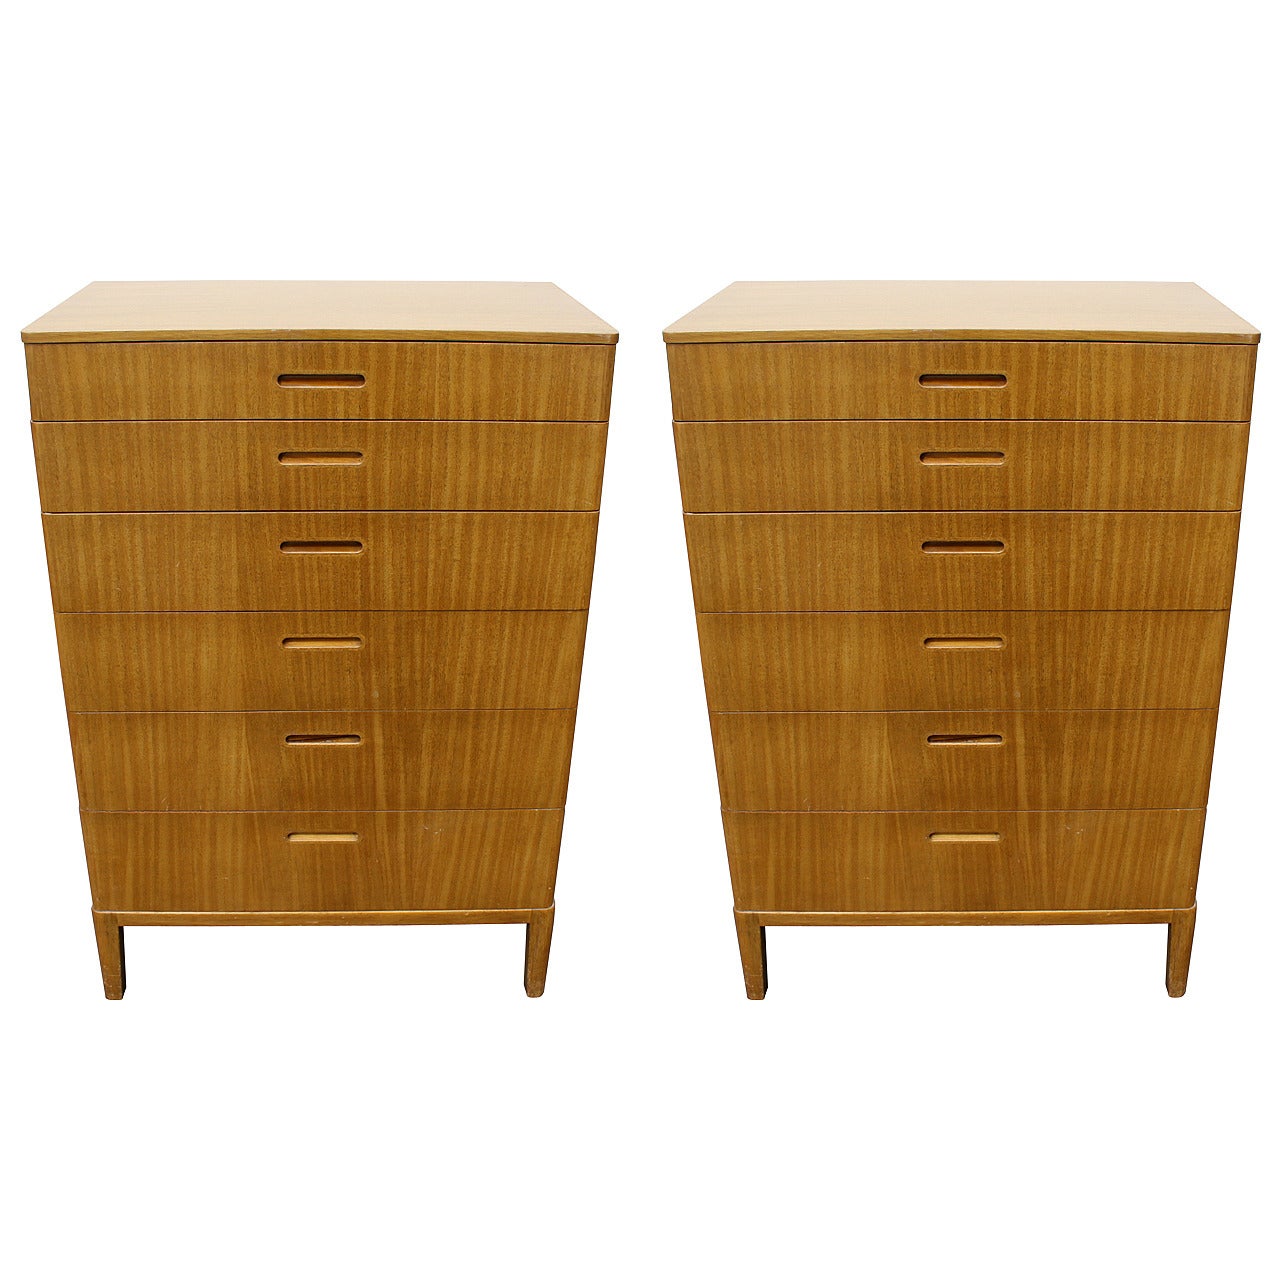 Pair of Edward Wormley Tall Dressers or Chest of Drawers